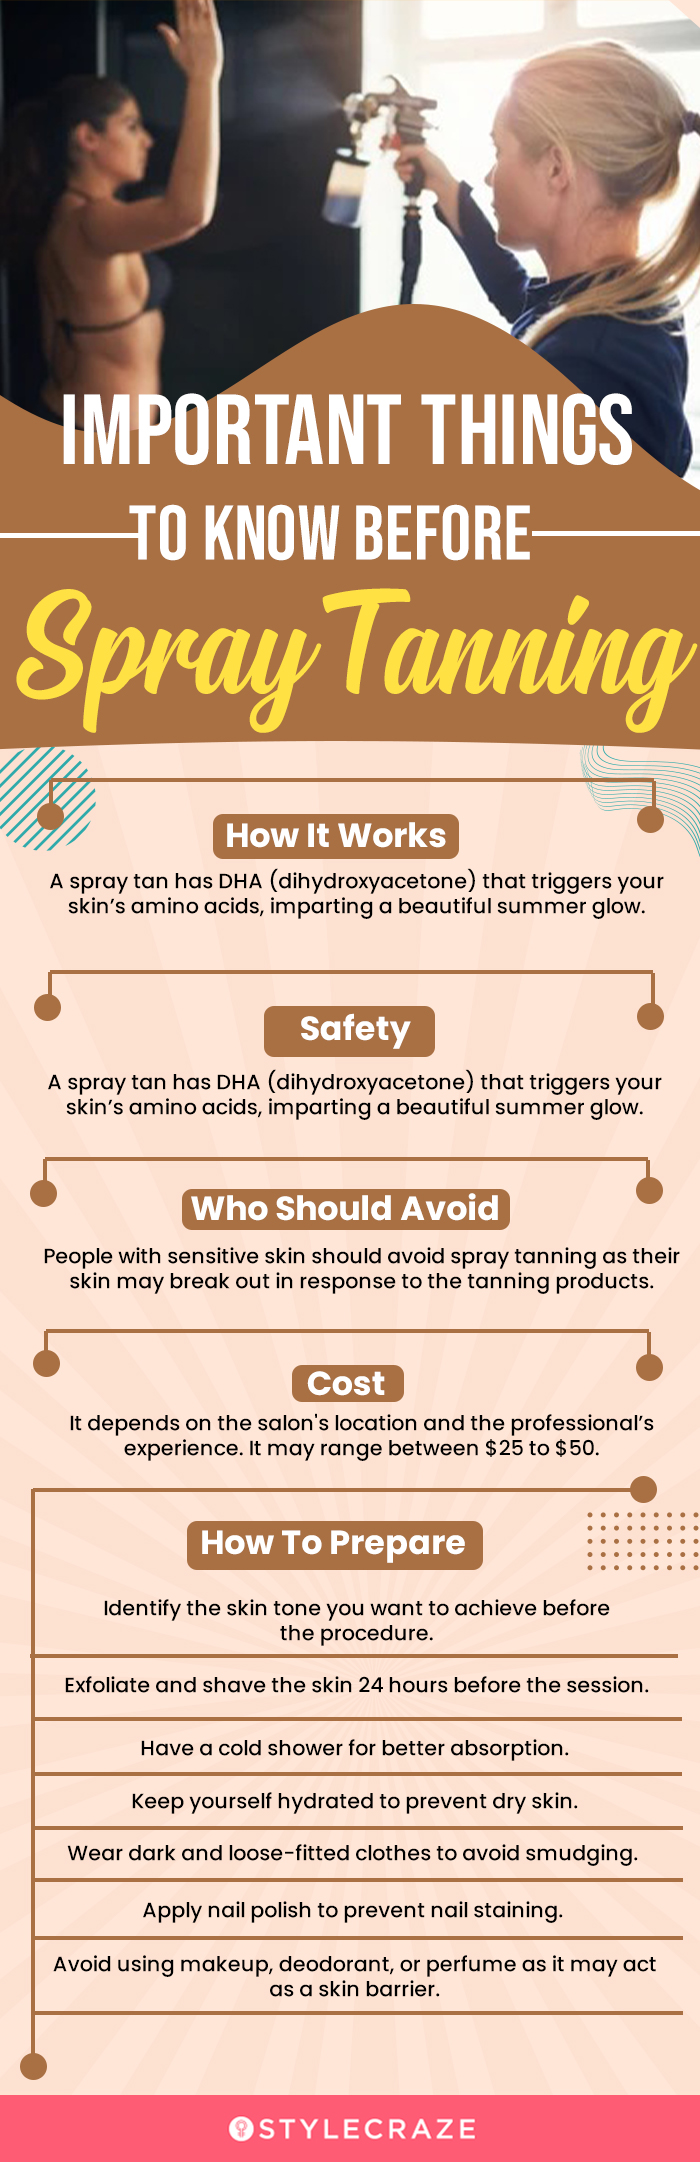 important things to know before spray tanning (infographic)